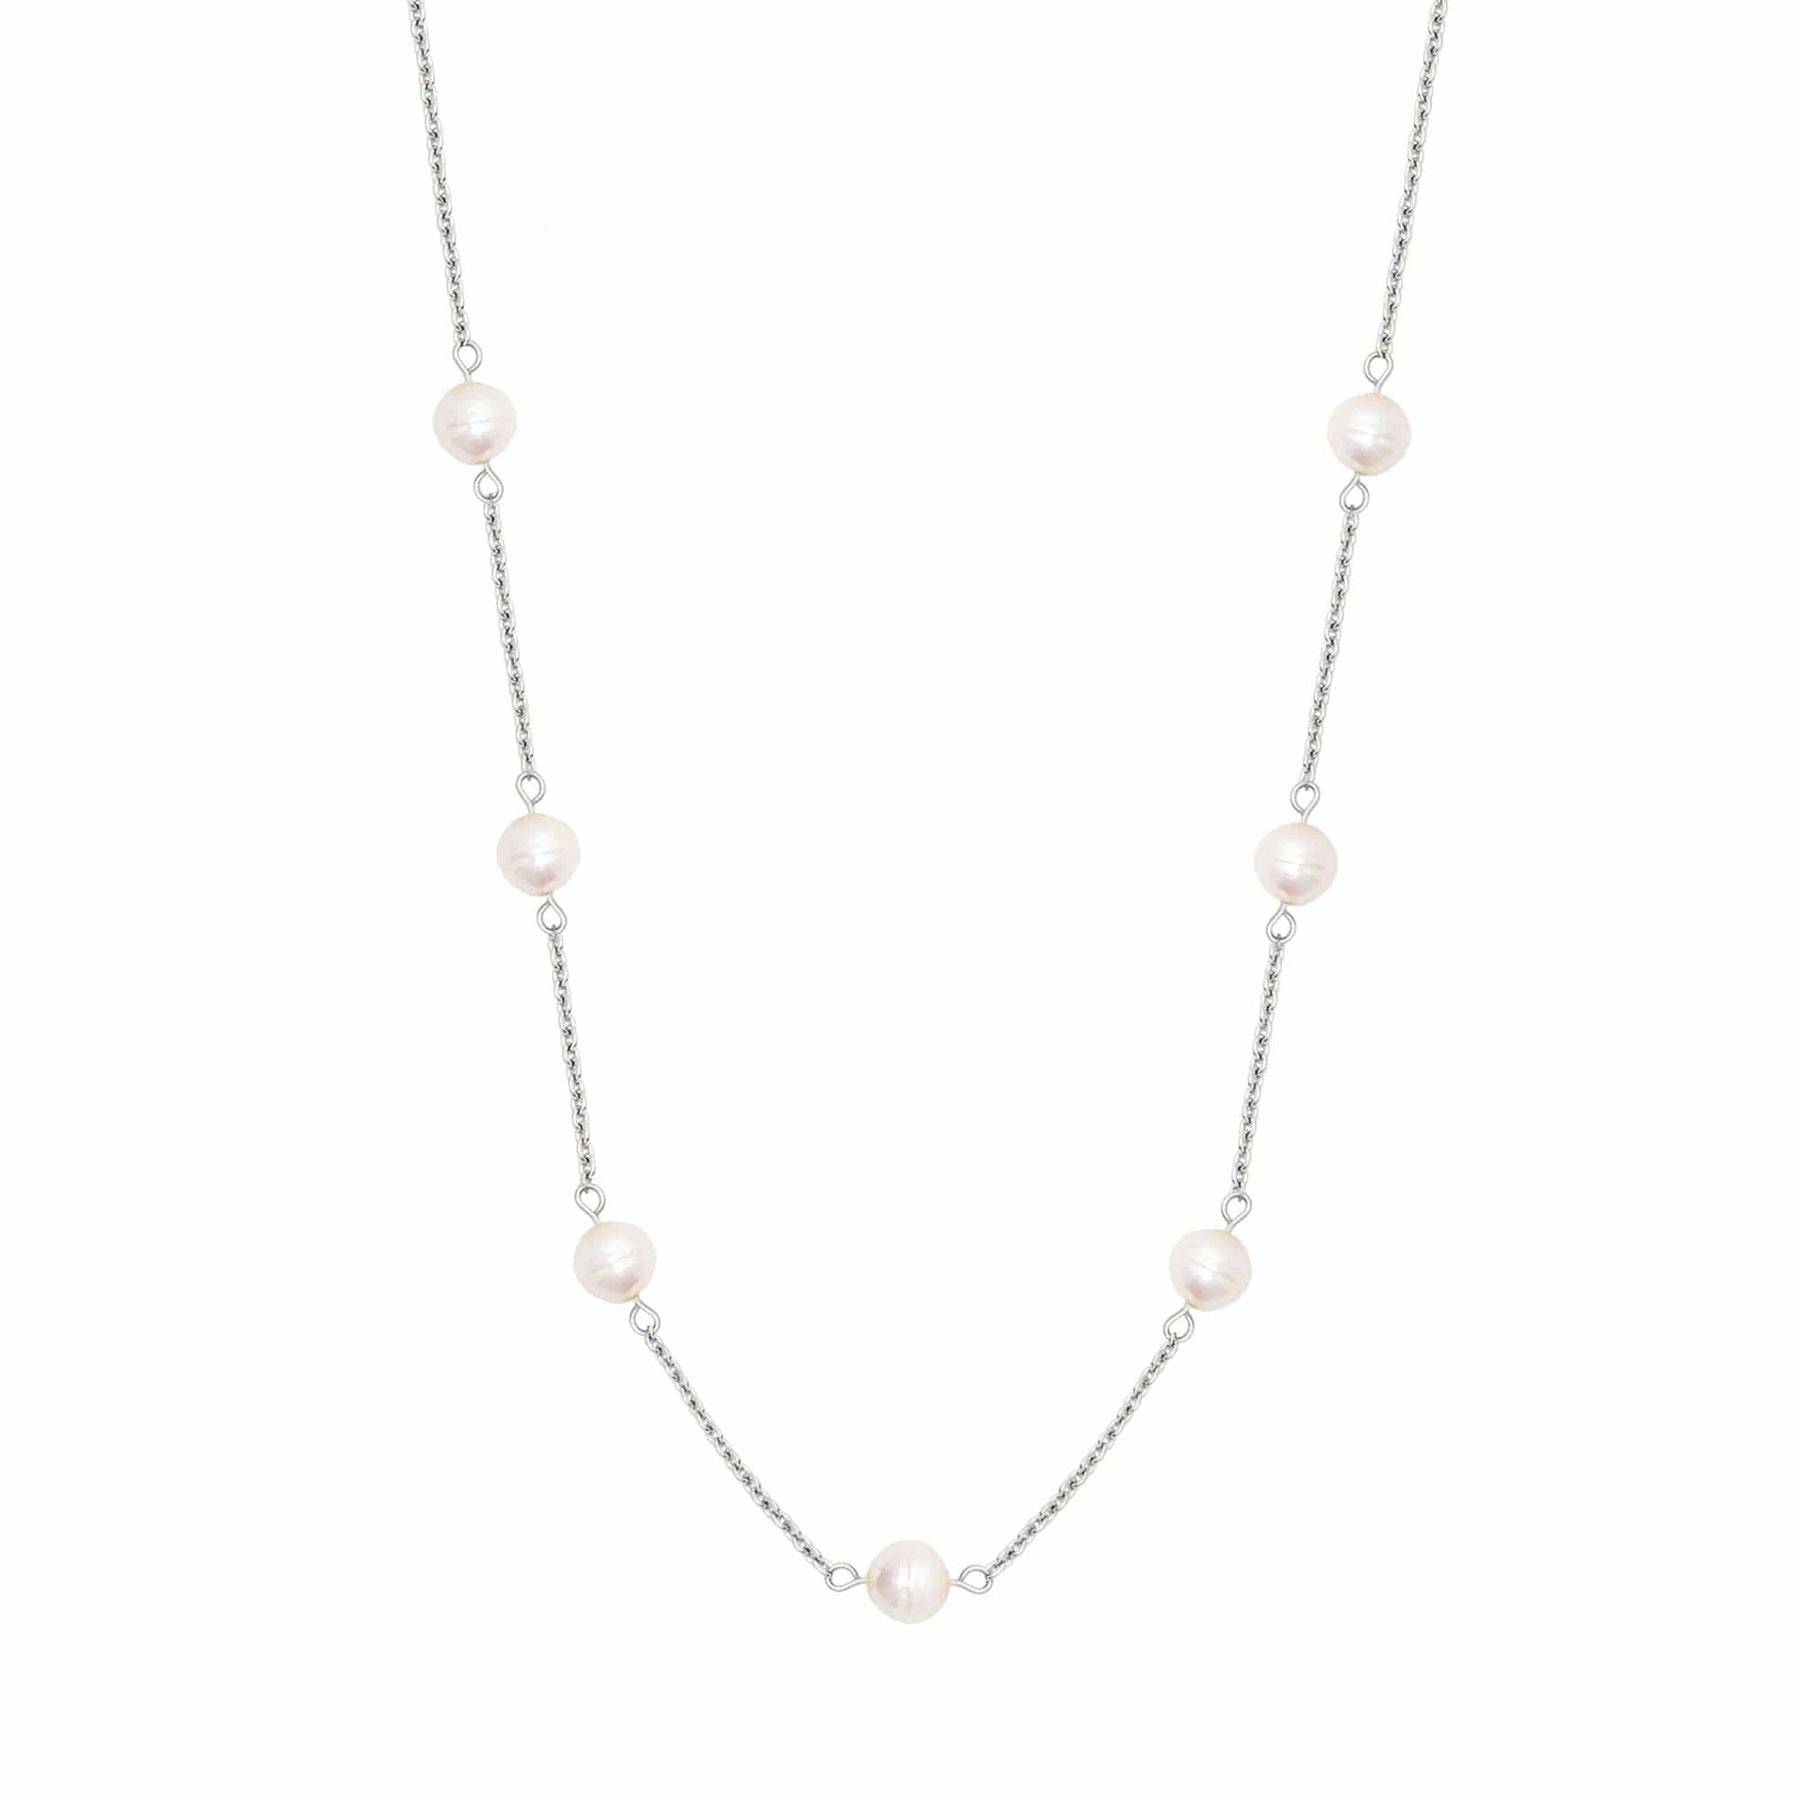 BohoMoon Stainless Steel Charlotte Pearl Necklace Silver